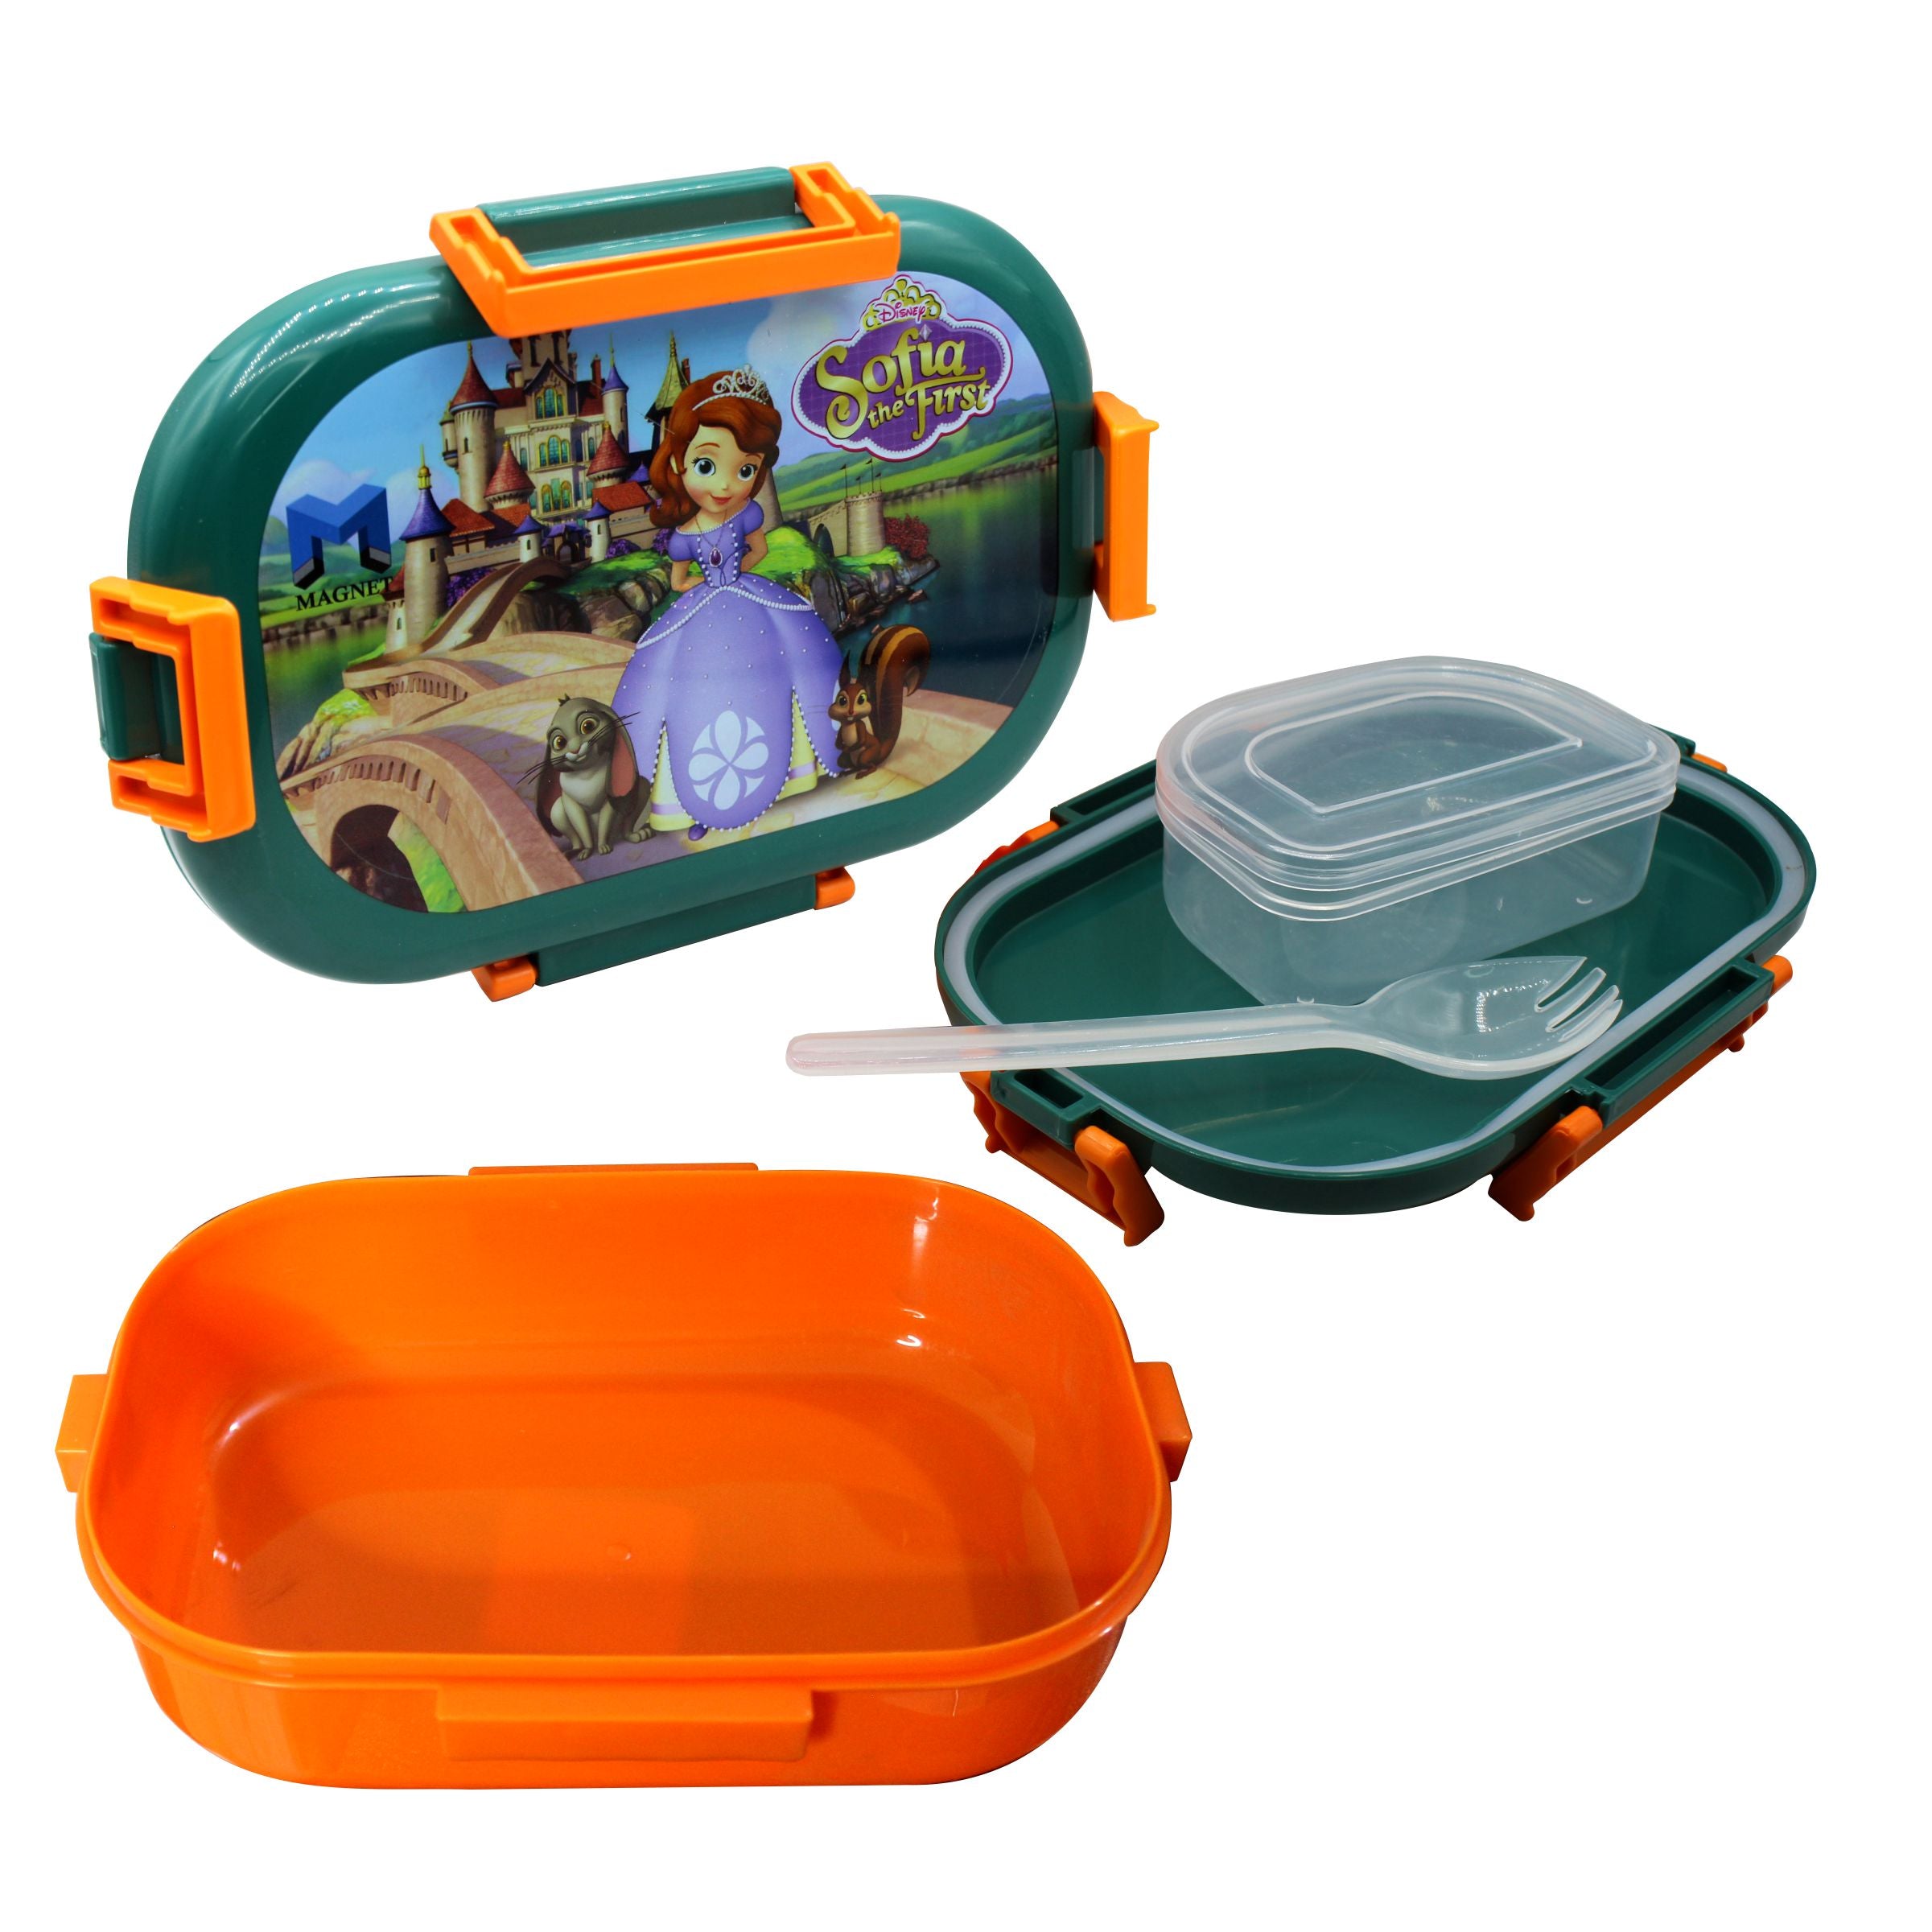 Sofia the First Character Premium Quality Lunch Box For Kids